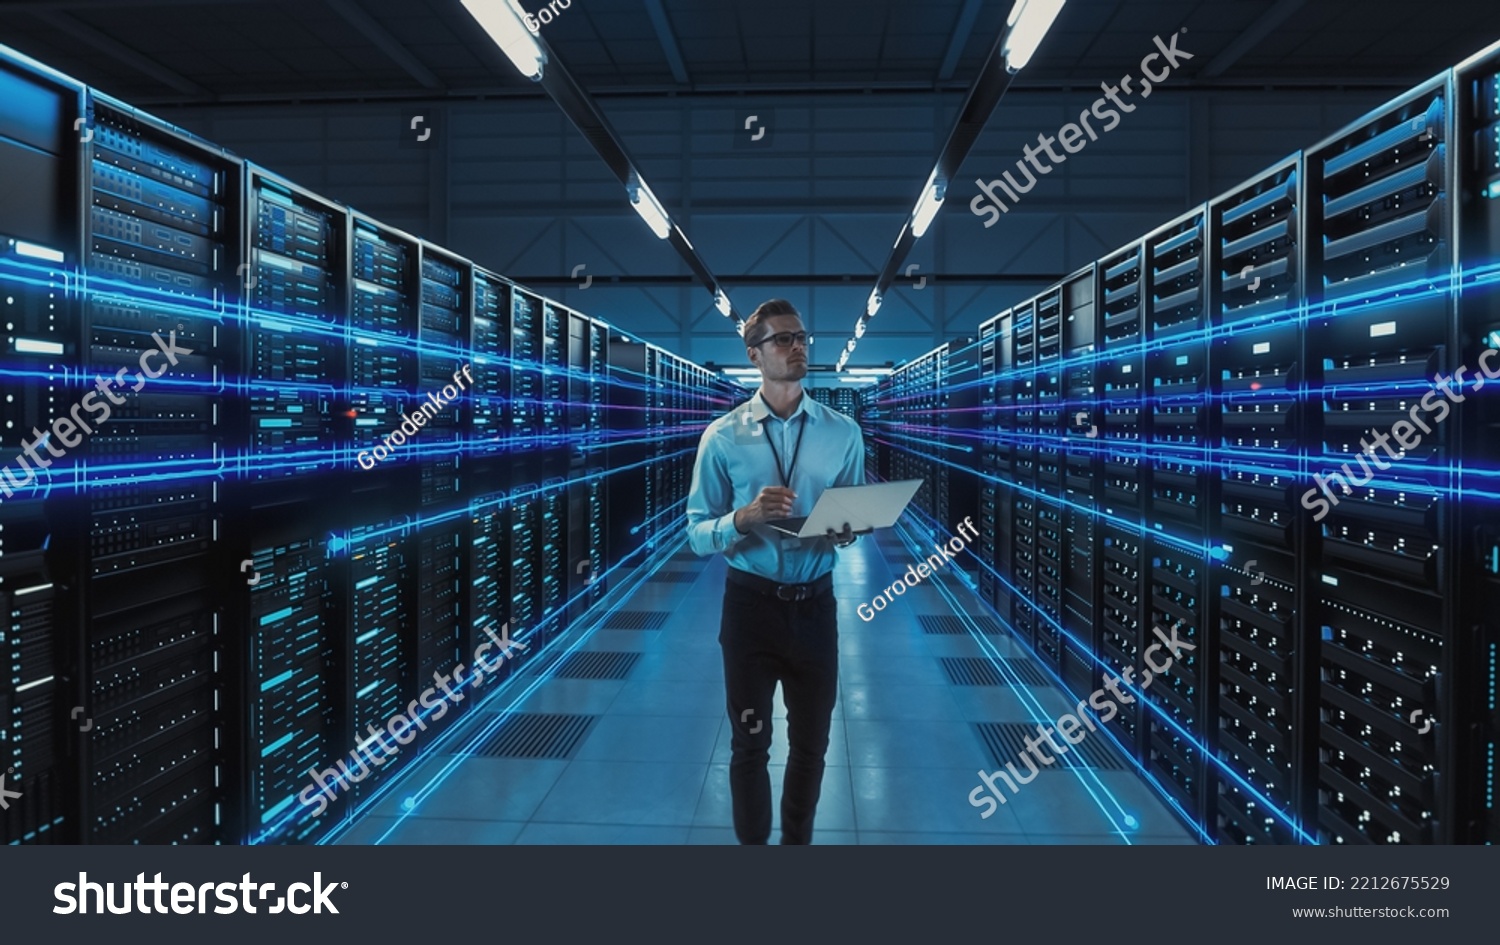 Futuristic Concept: Data Center Chief Technology Officer Holding Laptop, Standing In Warehouse, Information Digitalization Lines Streaming Through Servers. SAAS, Cloud Computing, Web Service #2212675529